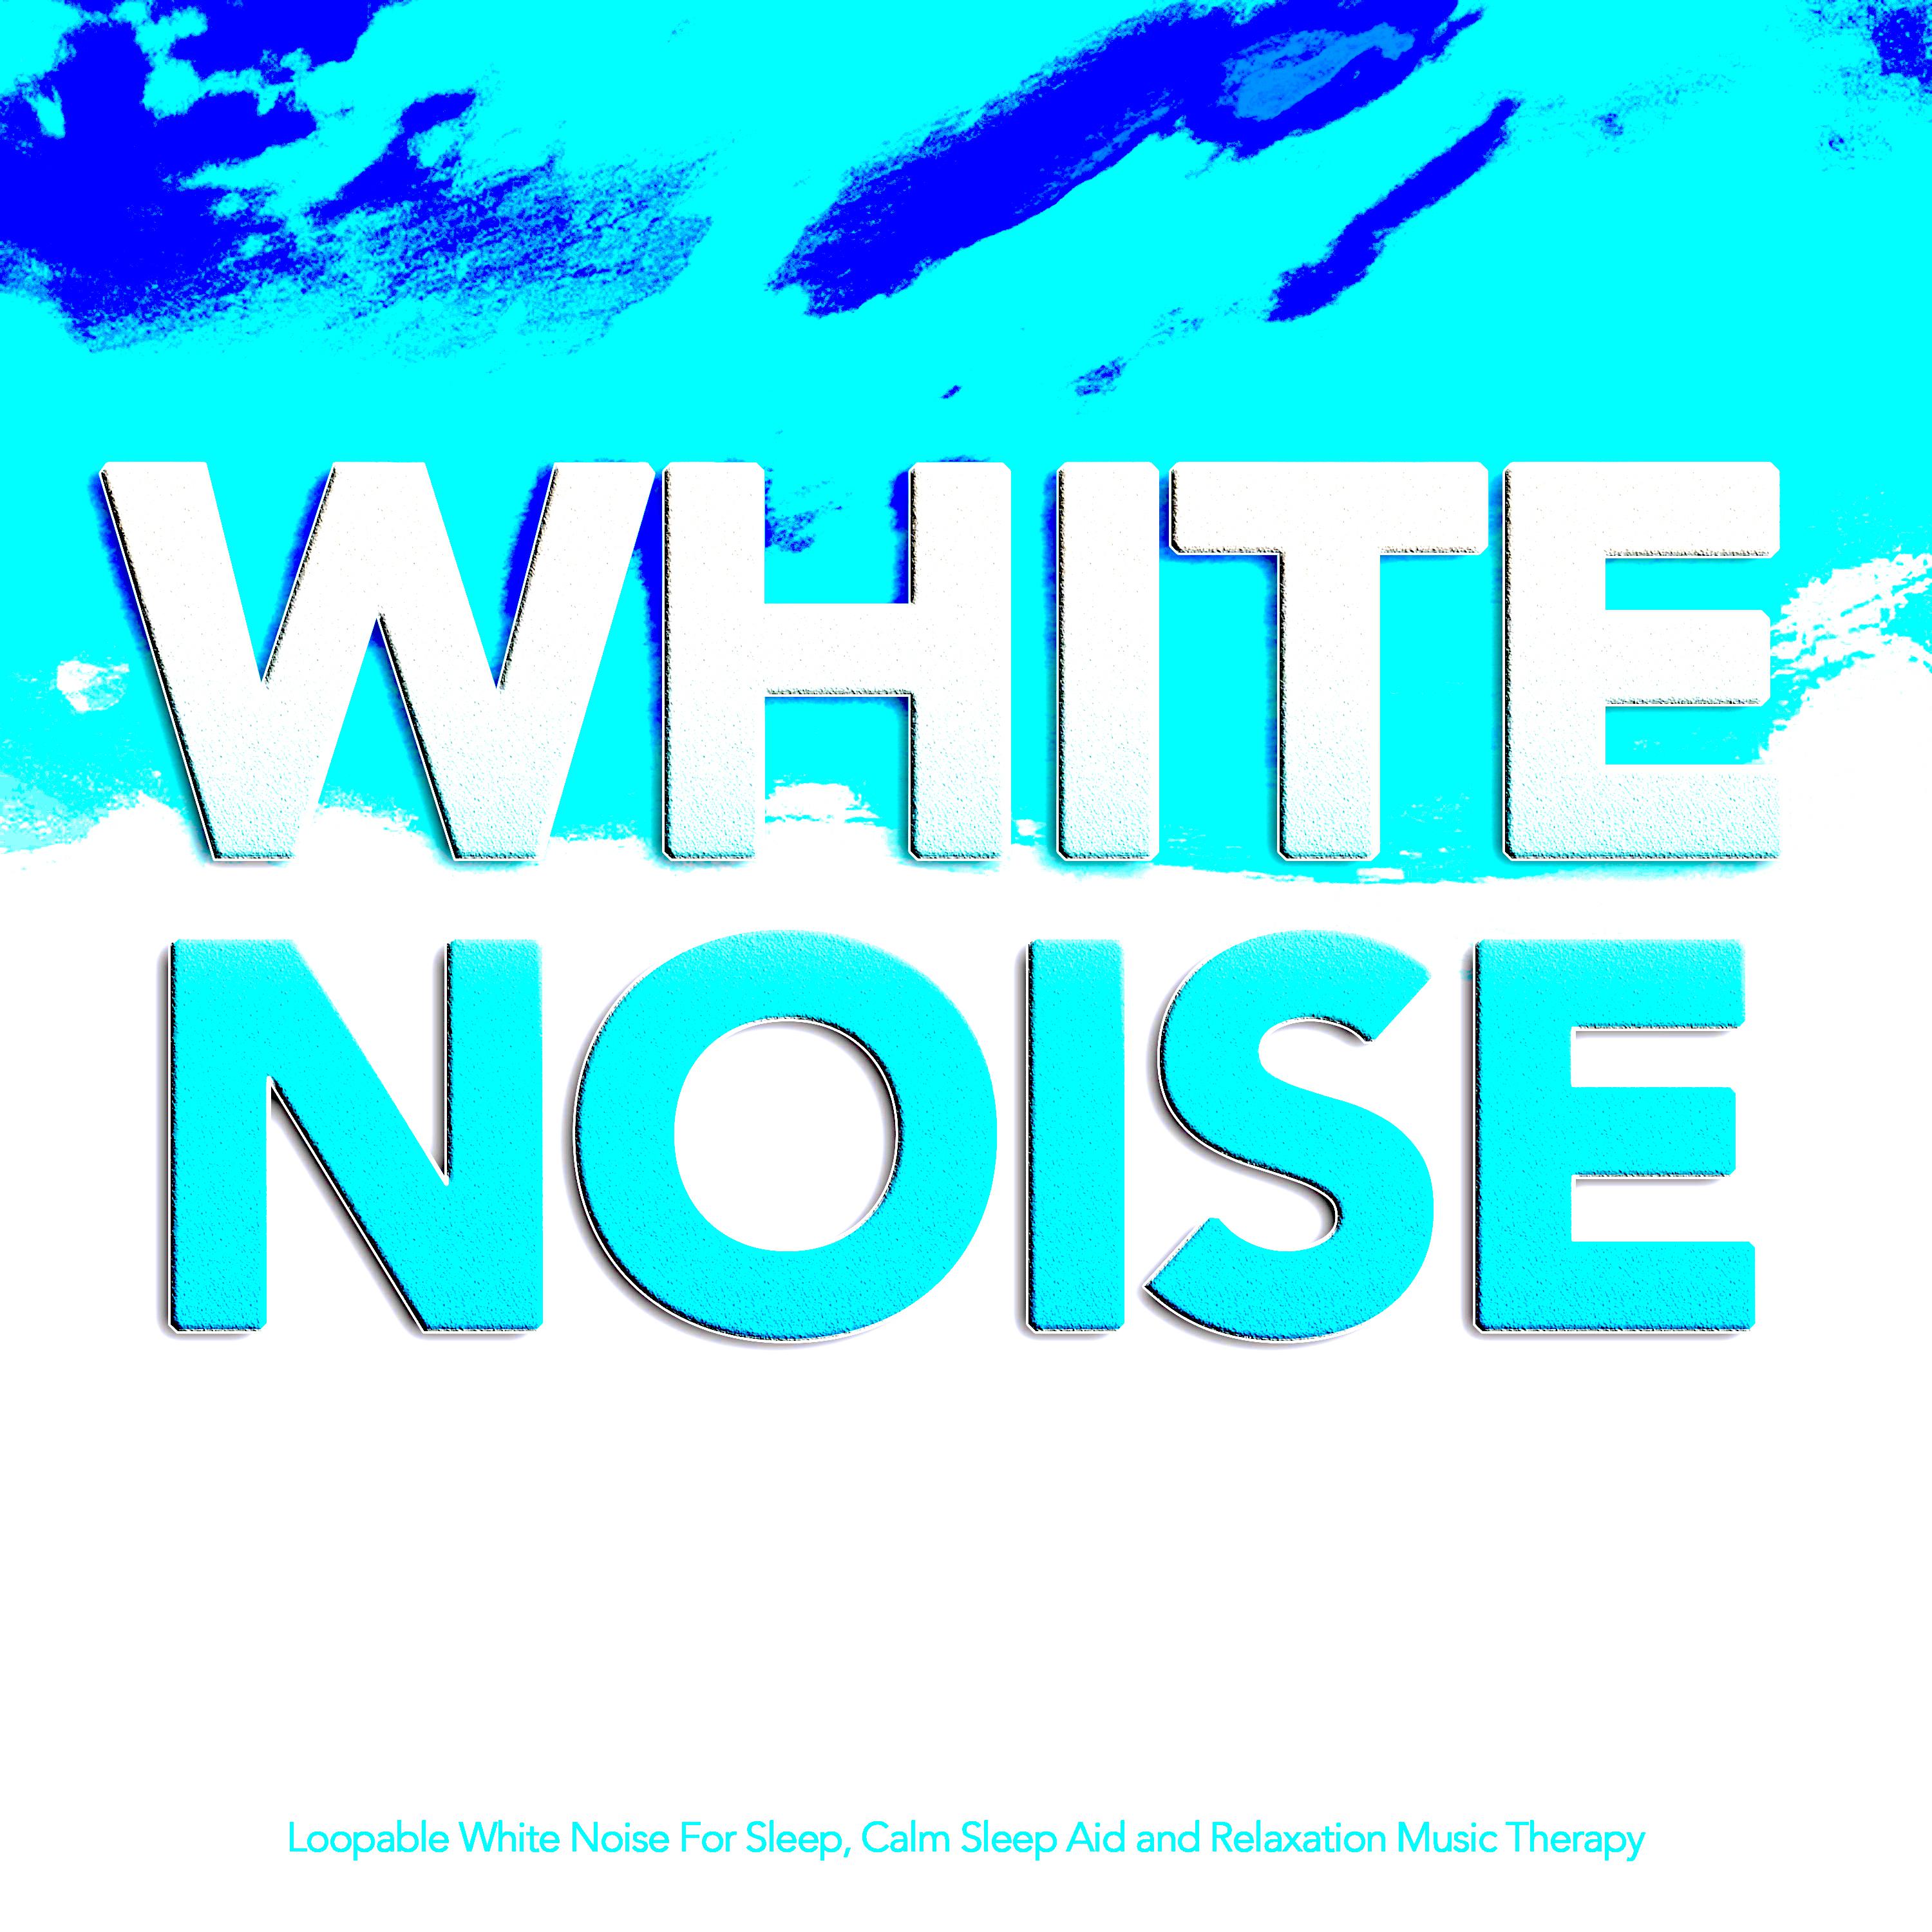 Soothing White Noise For Sleep